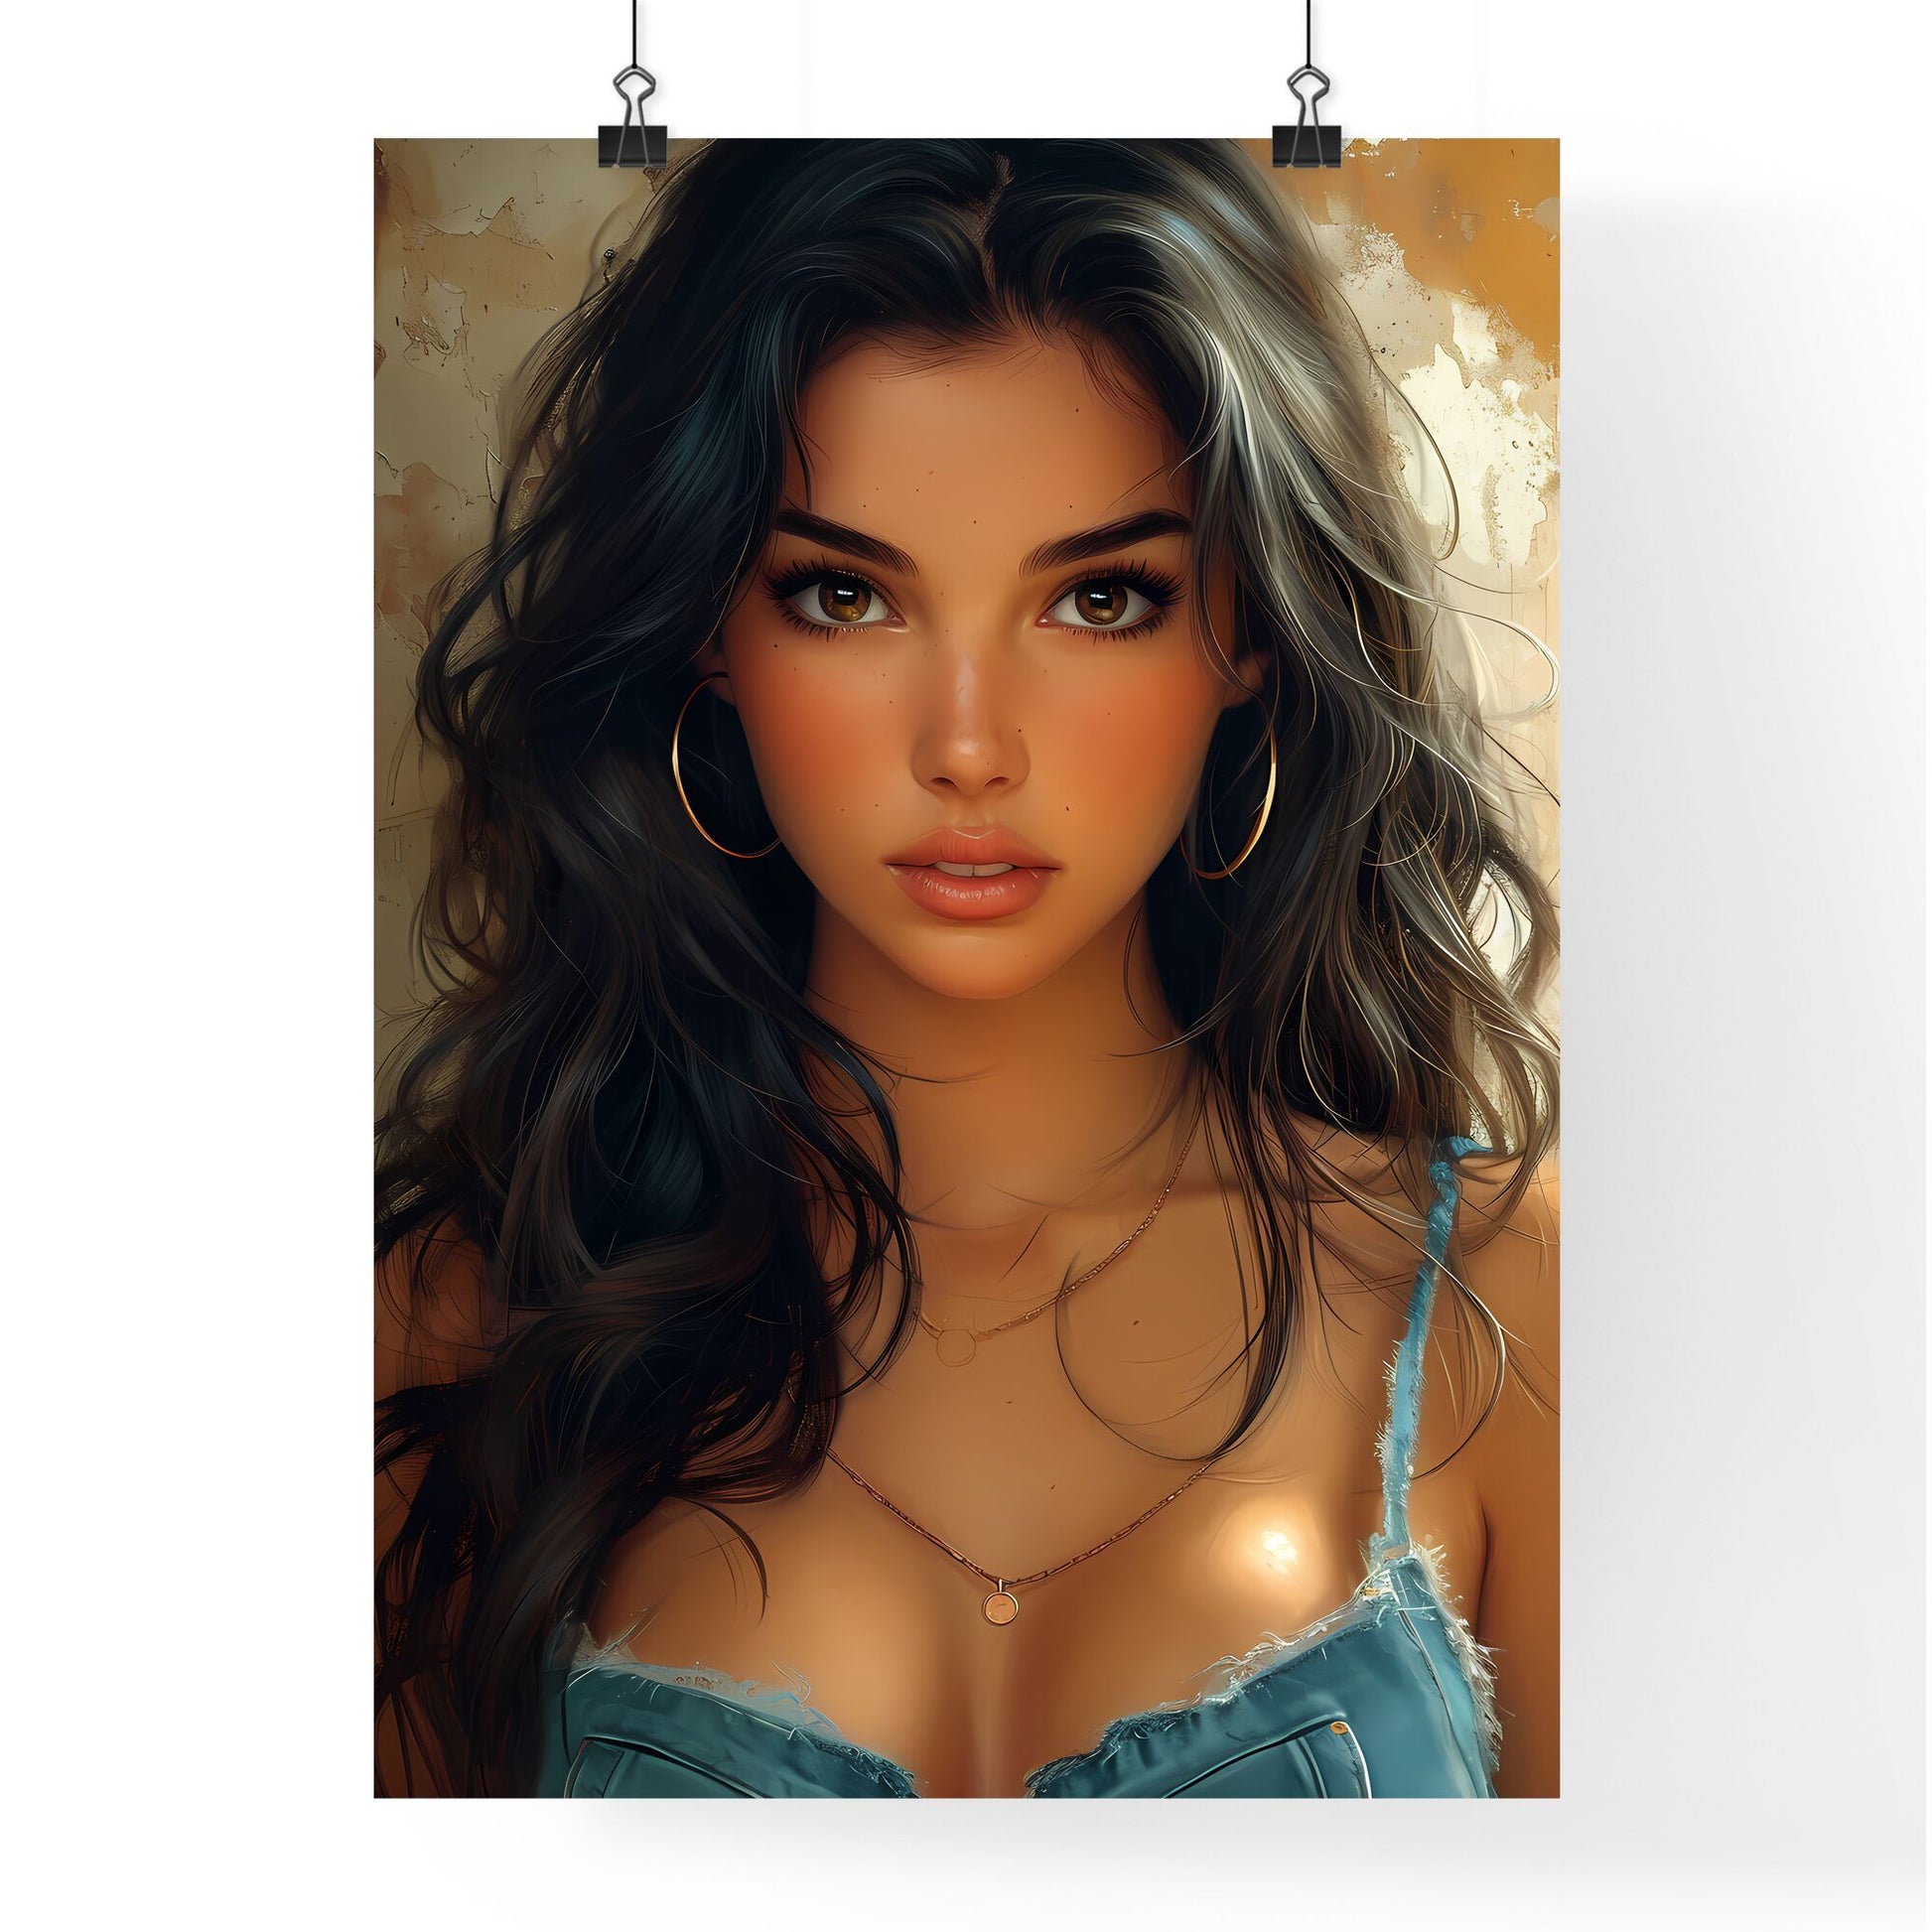 Chubby pin up girl, full body, brunette - Art print of a woman with long hair and gold hoop earrings Default Title